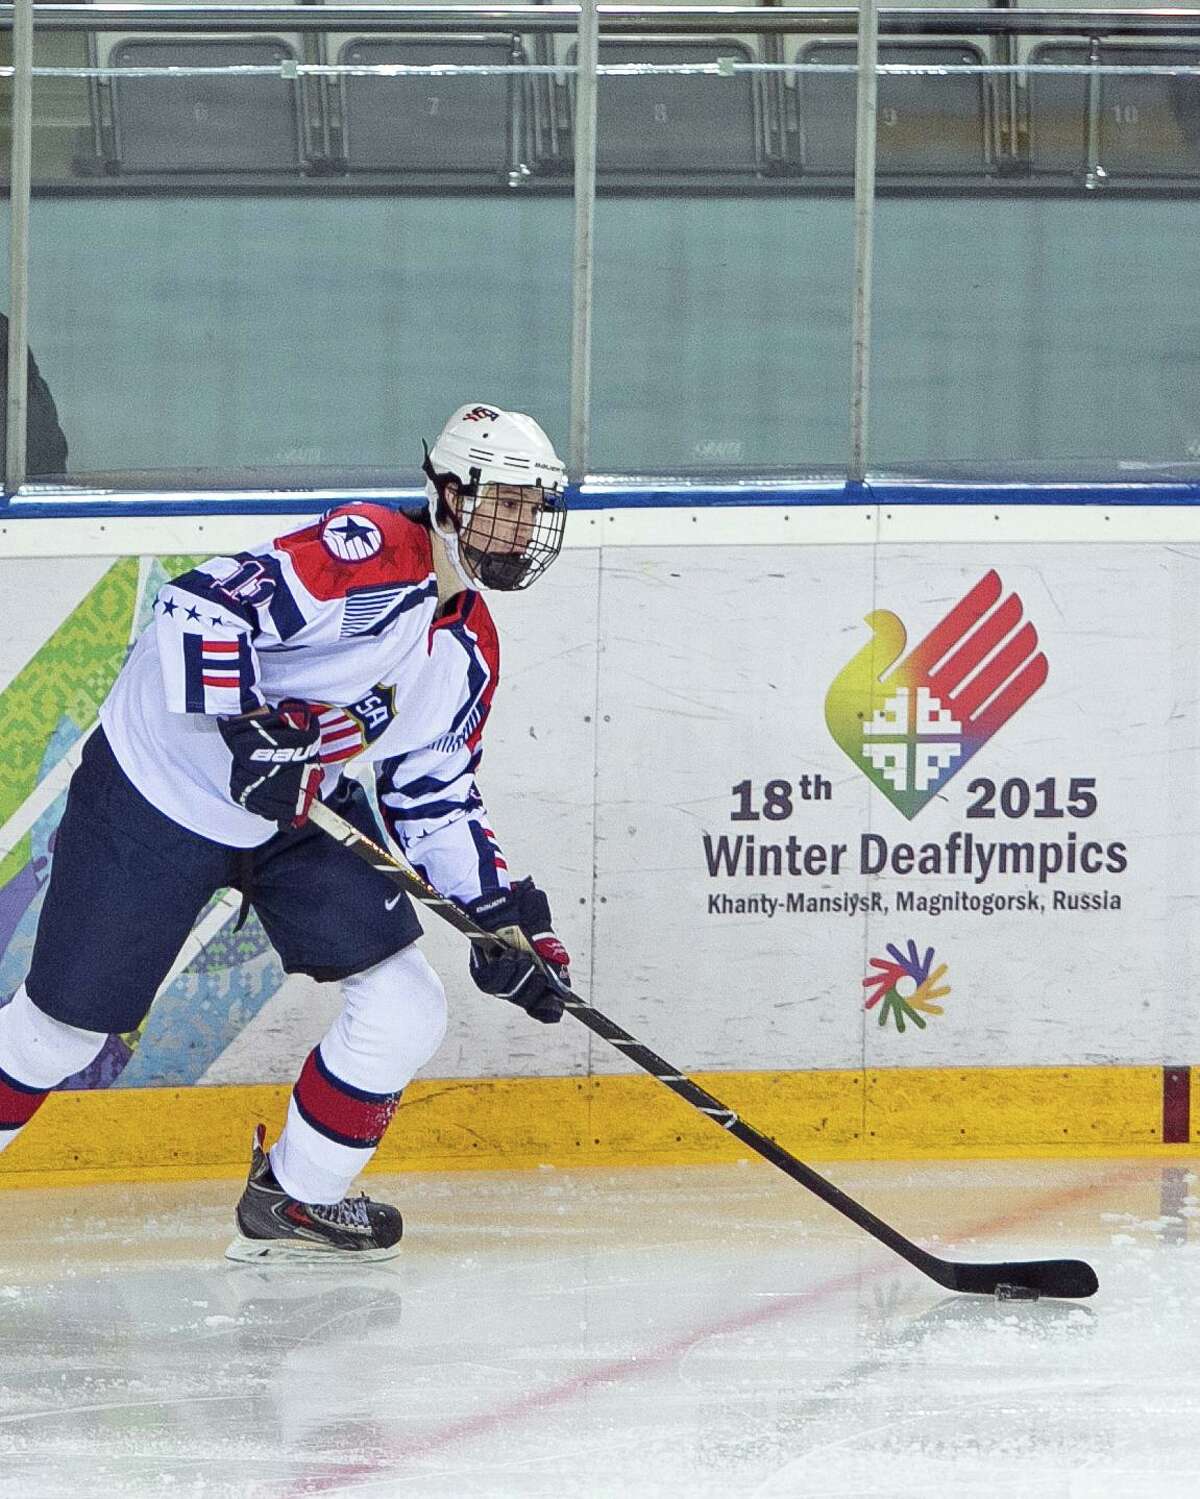 Garrett Gintoli of Shelton won a bronze medal with the U.S. ice hockey team last month at the 2015 Winter Deaflympics in Russia. Gintoli, who played junior hockey with the South Shore (Mass.) Kings this season, was joined on Team USA by his older brother, Peter.